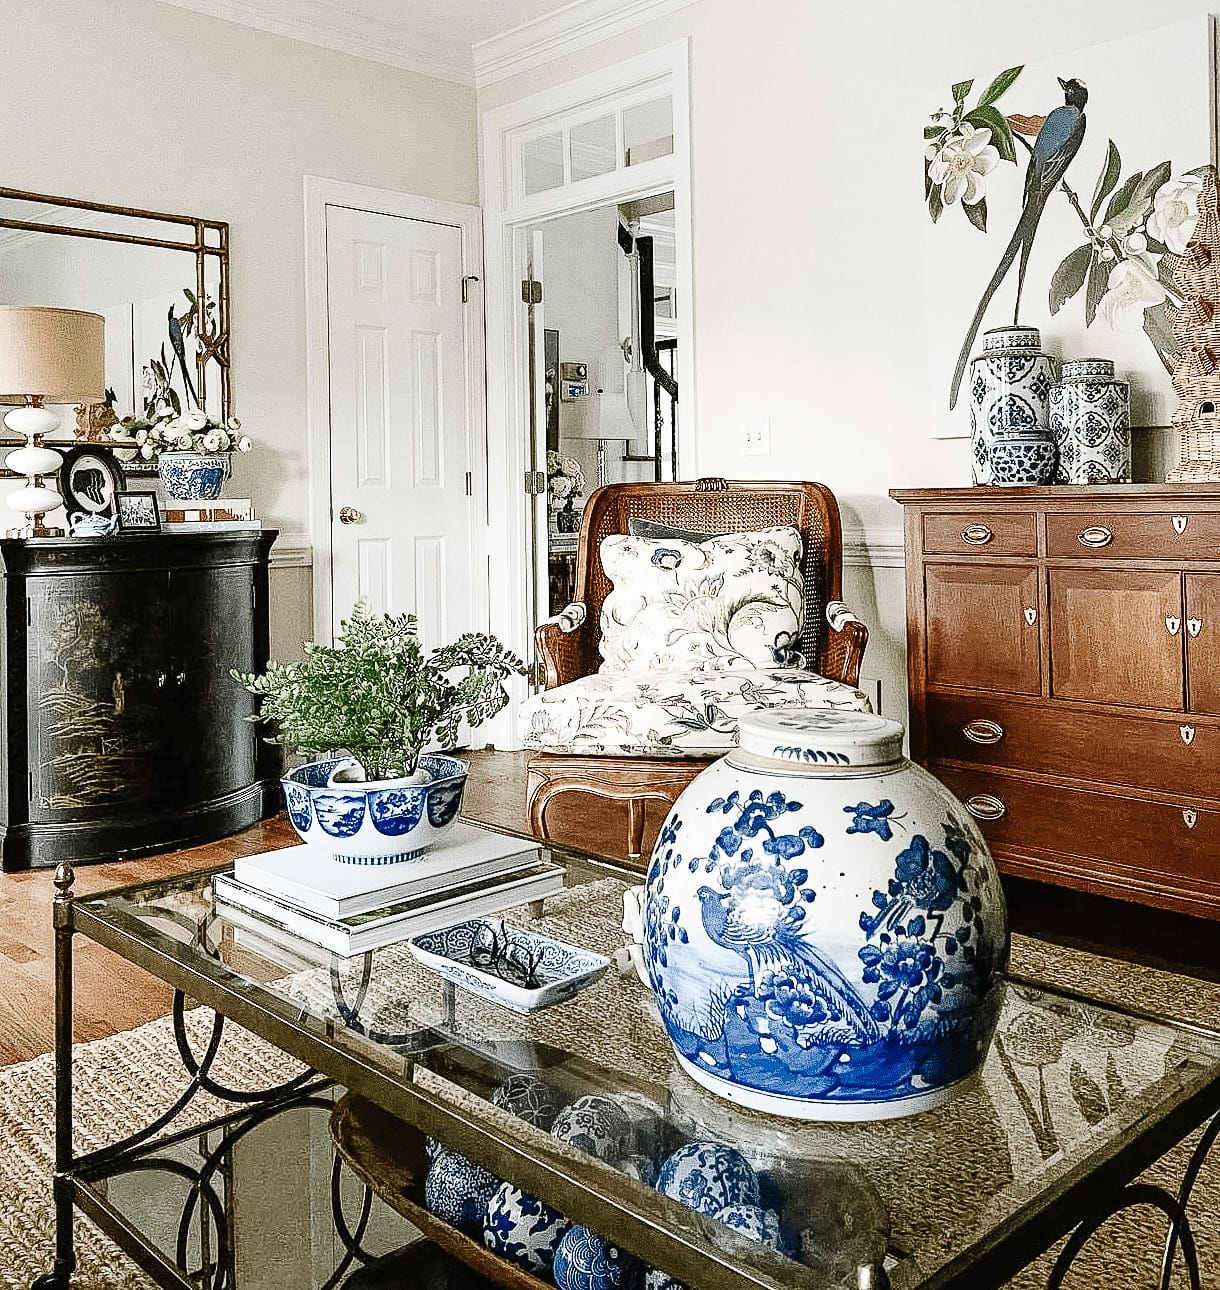 A Southern Charm Home Tour – Chinoiserie & Antiques